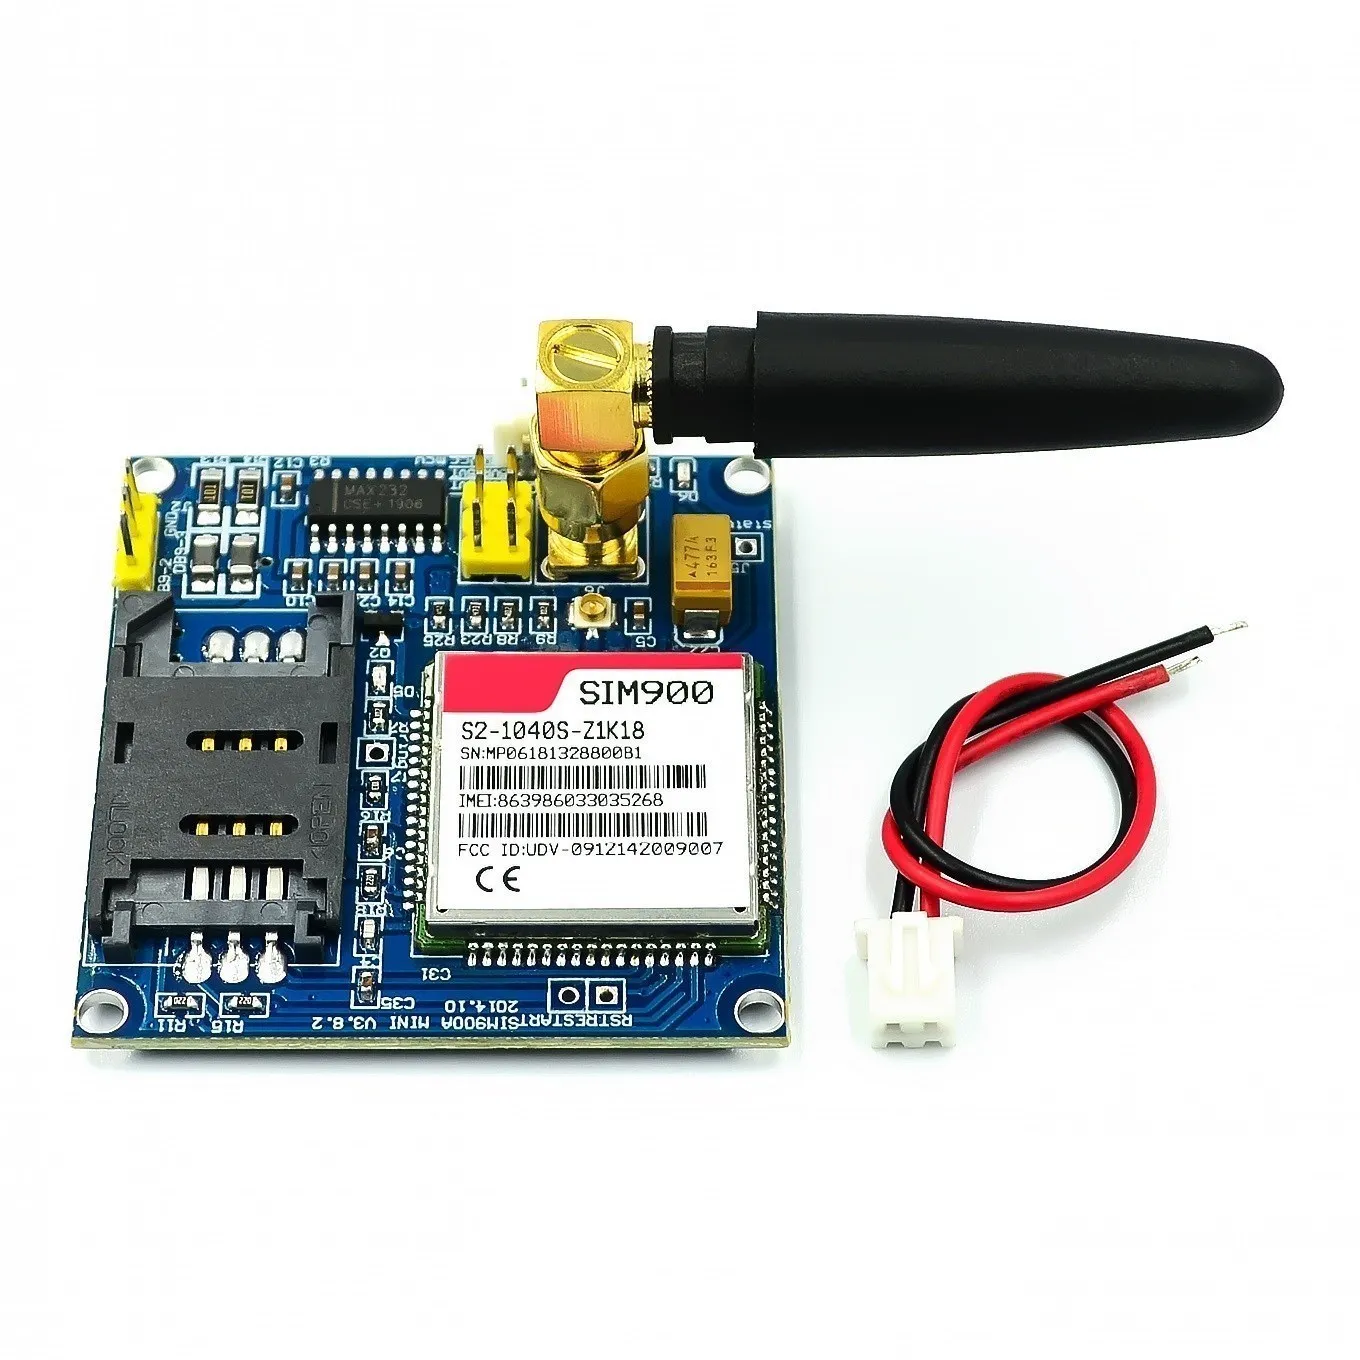 

SIM900A sim900 V4.0 Kit Wireless Extension Module GSM GPRS Board Antenna Tested Worldwide Store for arduino